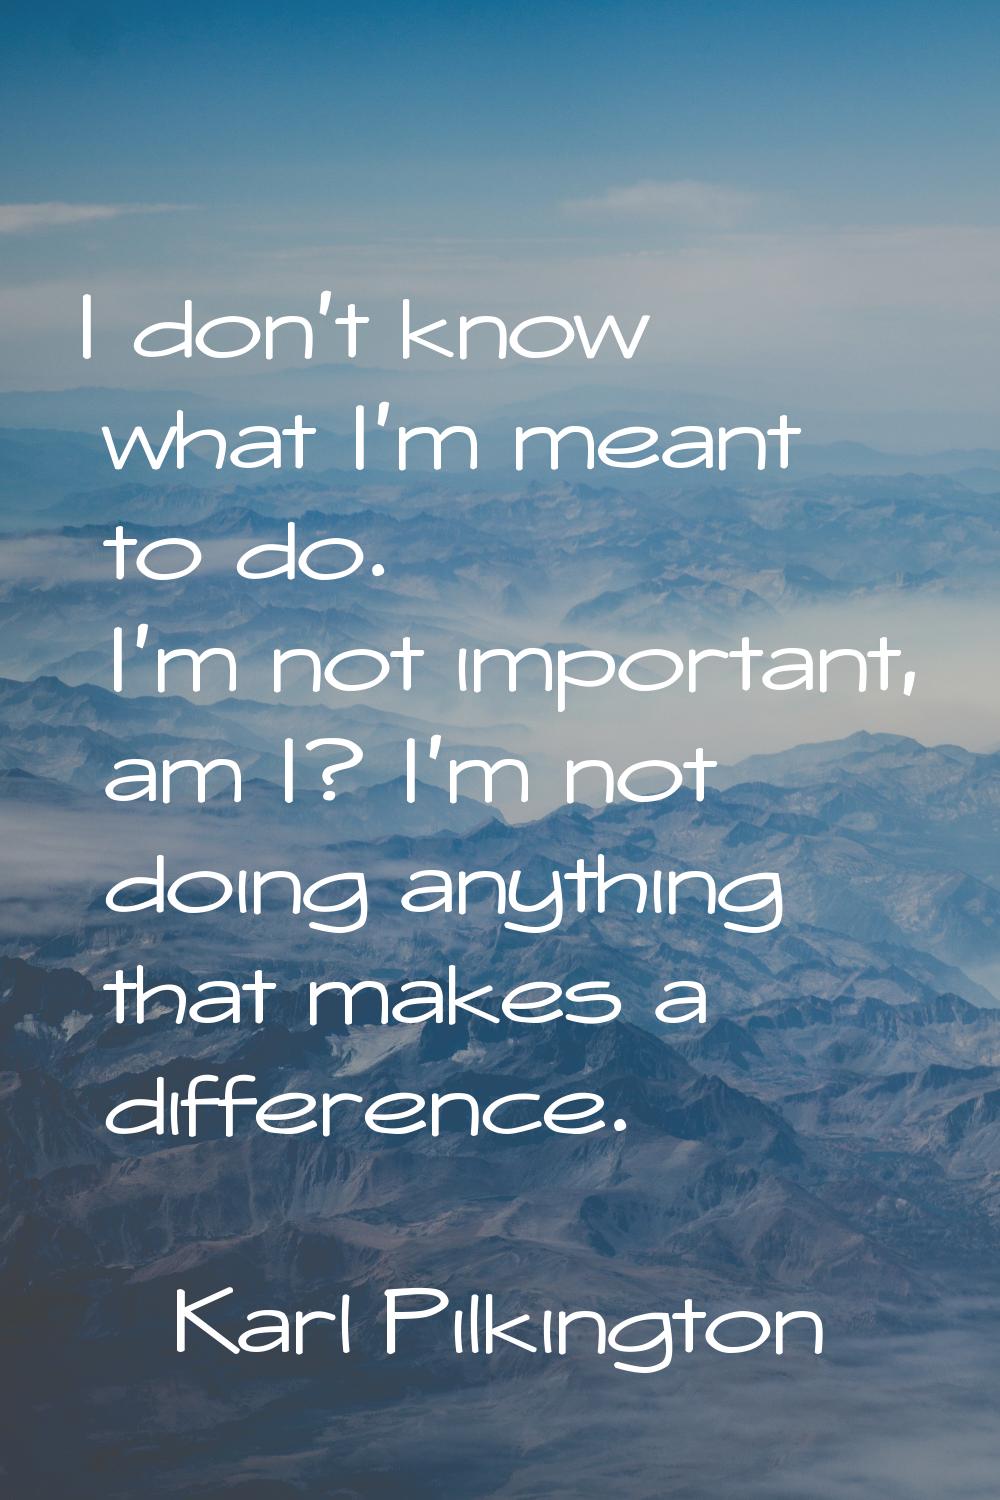 I don't know what I'm meant to do. I'm not important, am I? I'm not doing anything that makes a dif